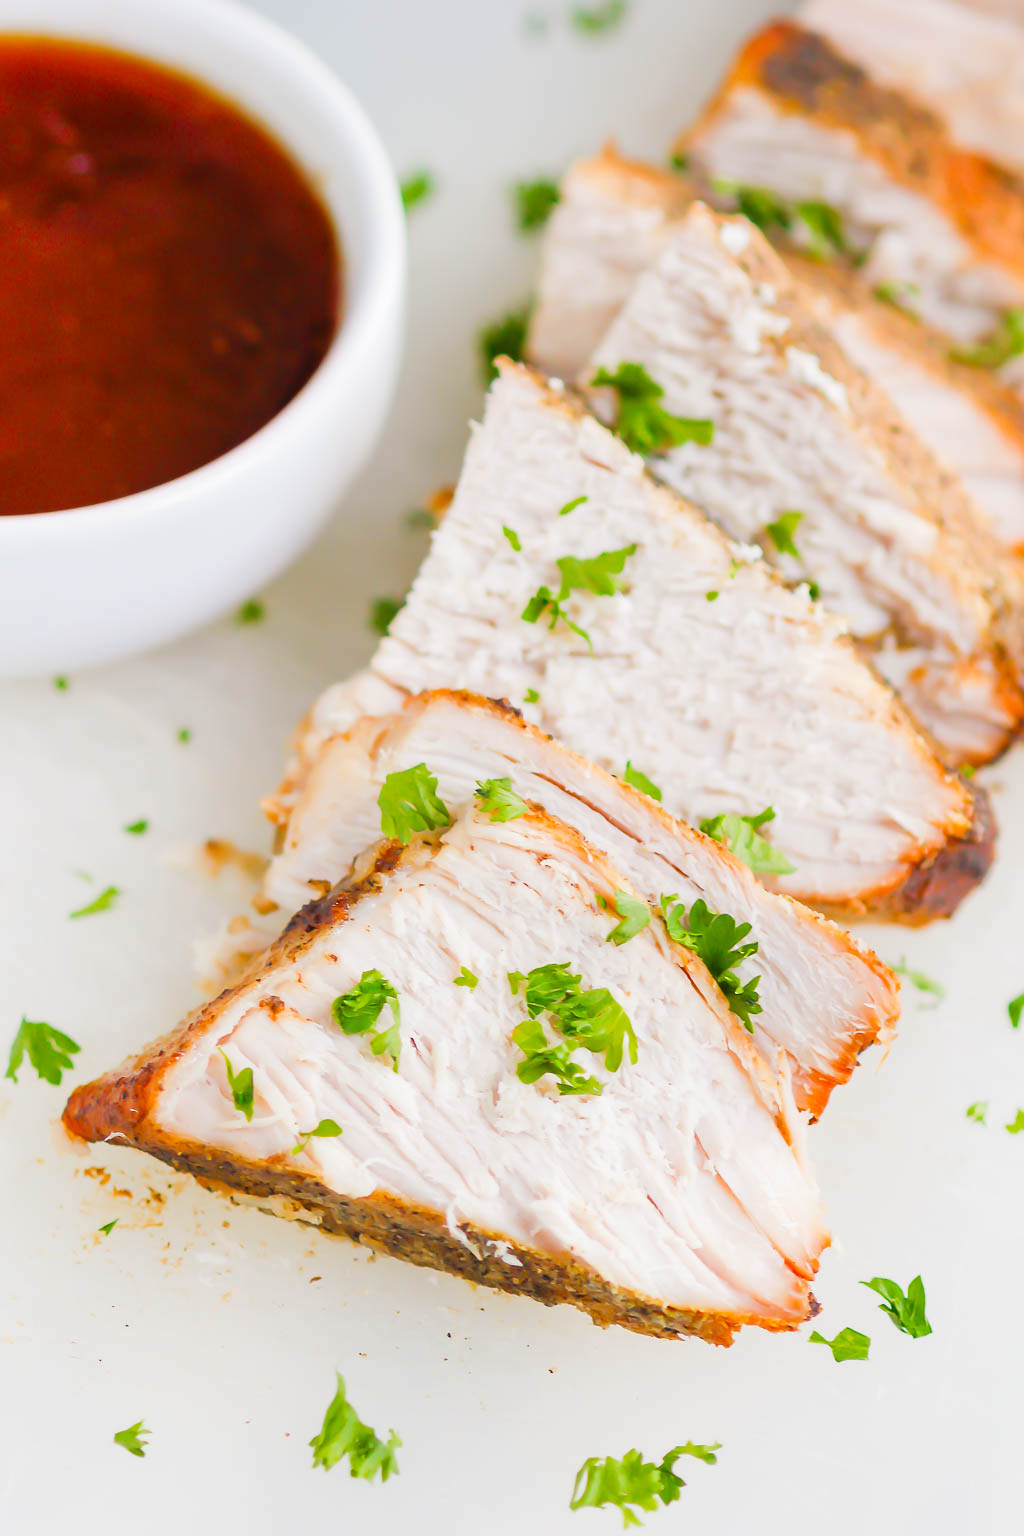 Slow Cooker Honey Balsamic Pork Loin is a simple dish that's loaded with cozy flavors. Made with just a few ingredients, this pork comes out tender, juicy, and drizzled with the most delicious honey balsamic glaze! #pork #porkrecipe #porkloin #porkloinrecipe #porkroast #slowcookerporkroast #slowcookerpork #honeybalsamic #honeybalsamicpork #balsamicpork #fallrecipes #falldinners #easydinners